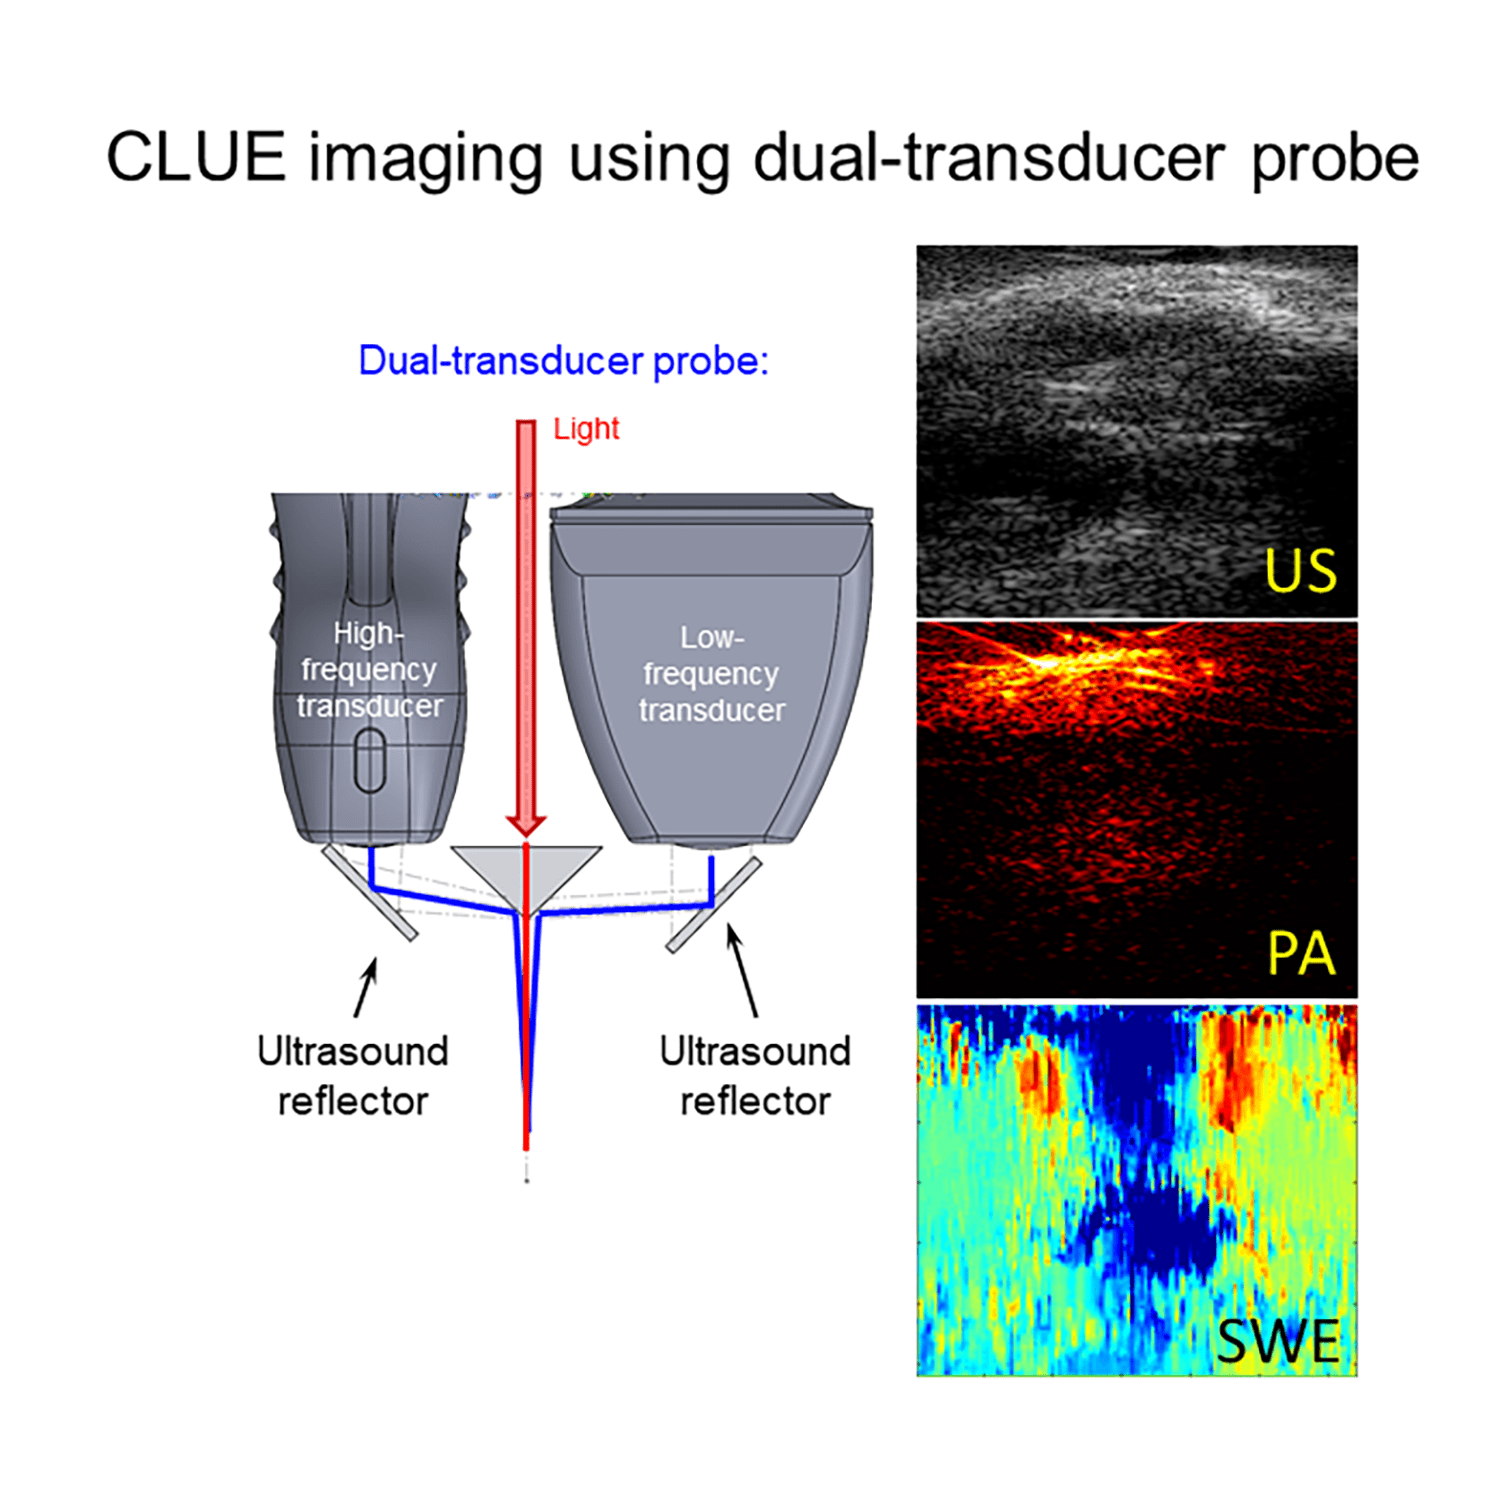 Multi-Transducer Probe for Combined Ultrasound, Photoacoustic and SWE Imaging